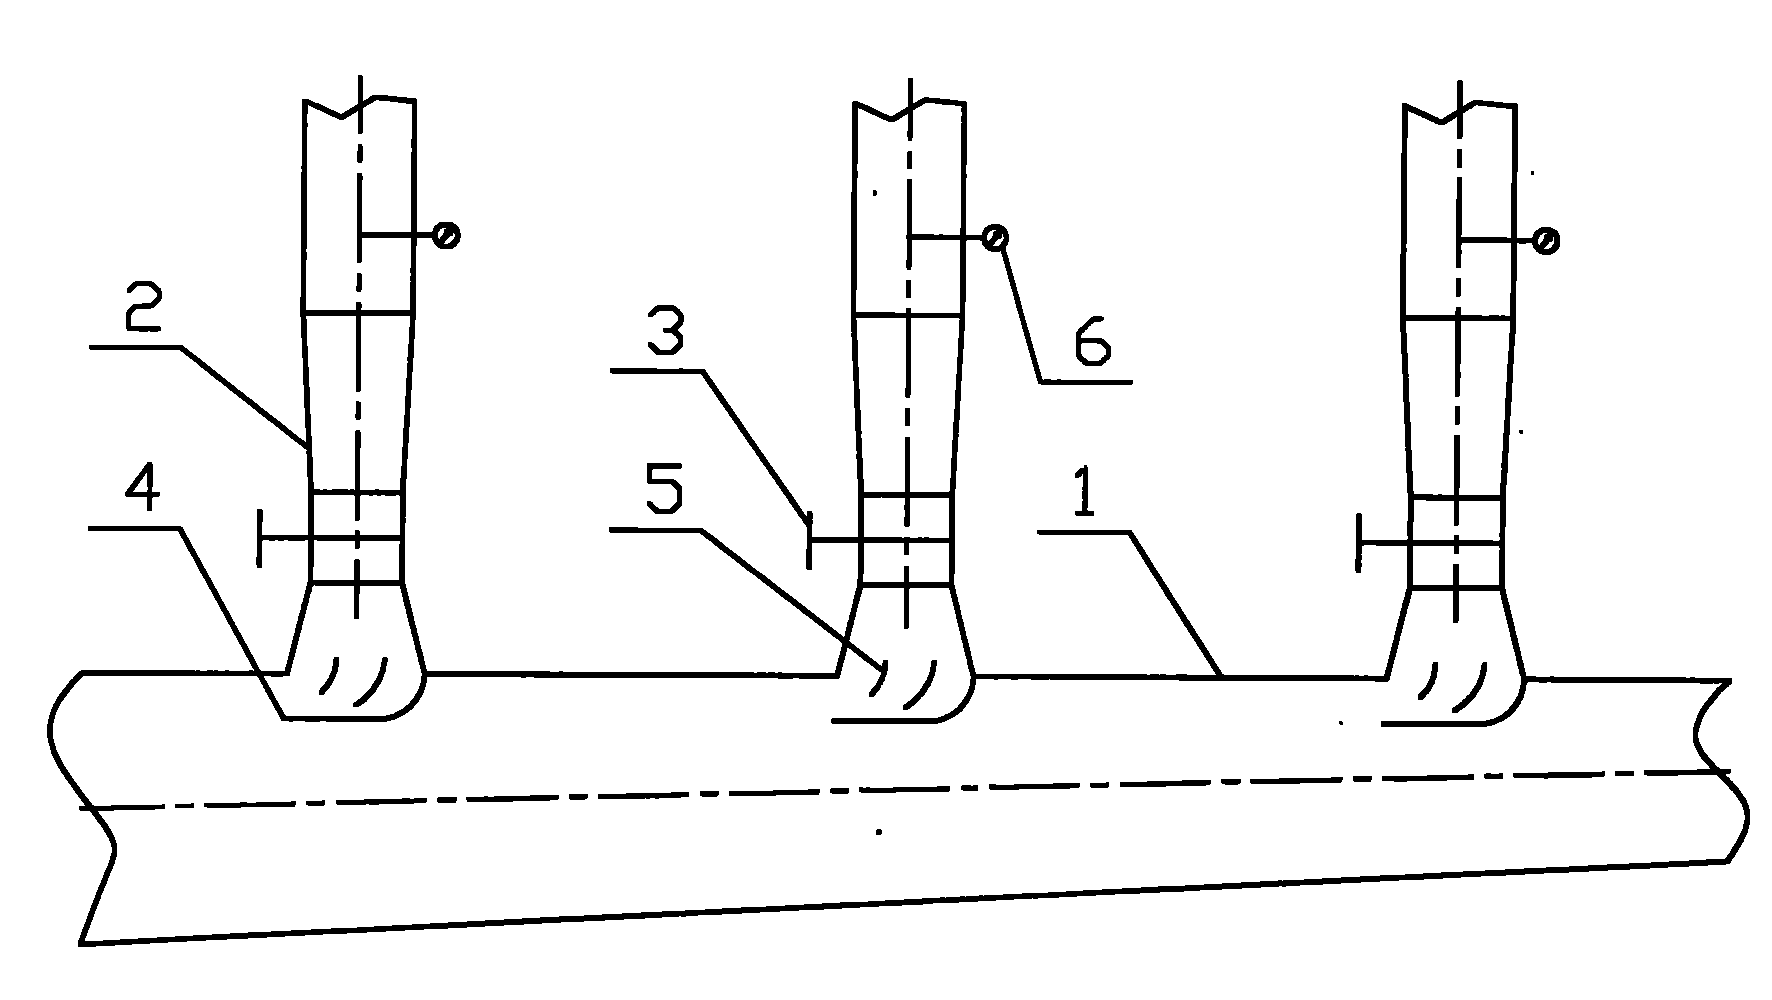 Pipeline structure for equally distributing purifying smoke pipe air quantity